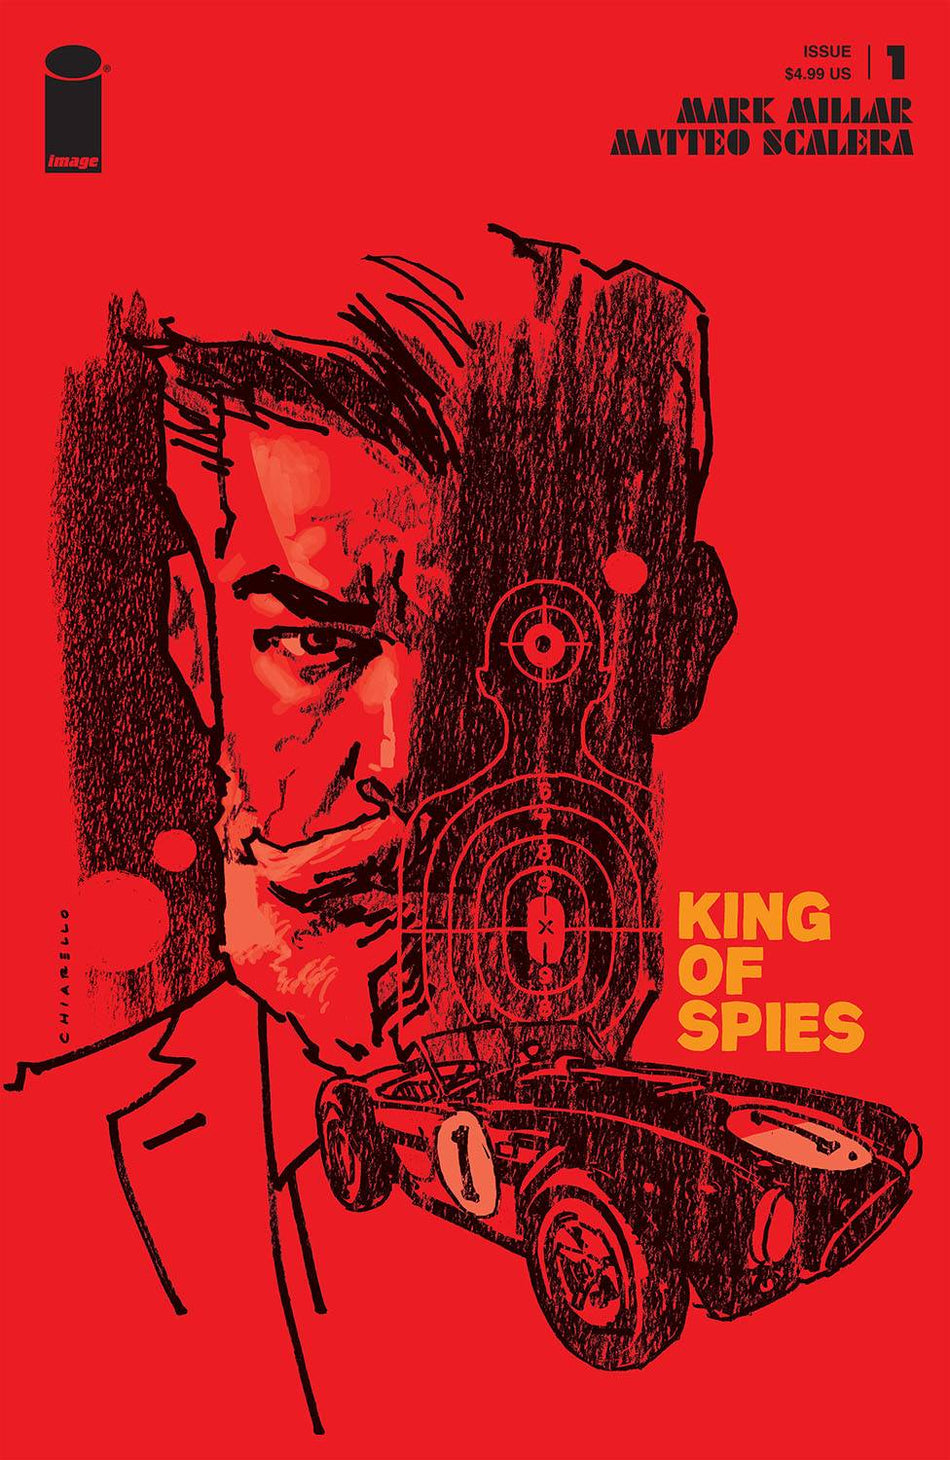 Photo of King of Spies Issue 1 (Of 4) CVR C Chiarello (MR) comic sold by Stronghold Collectibles